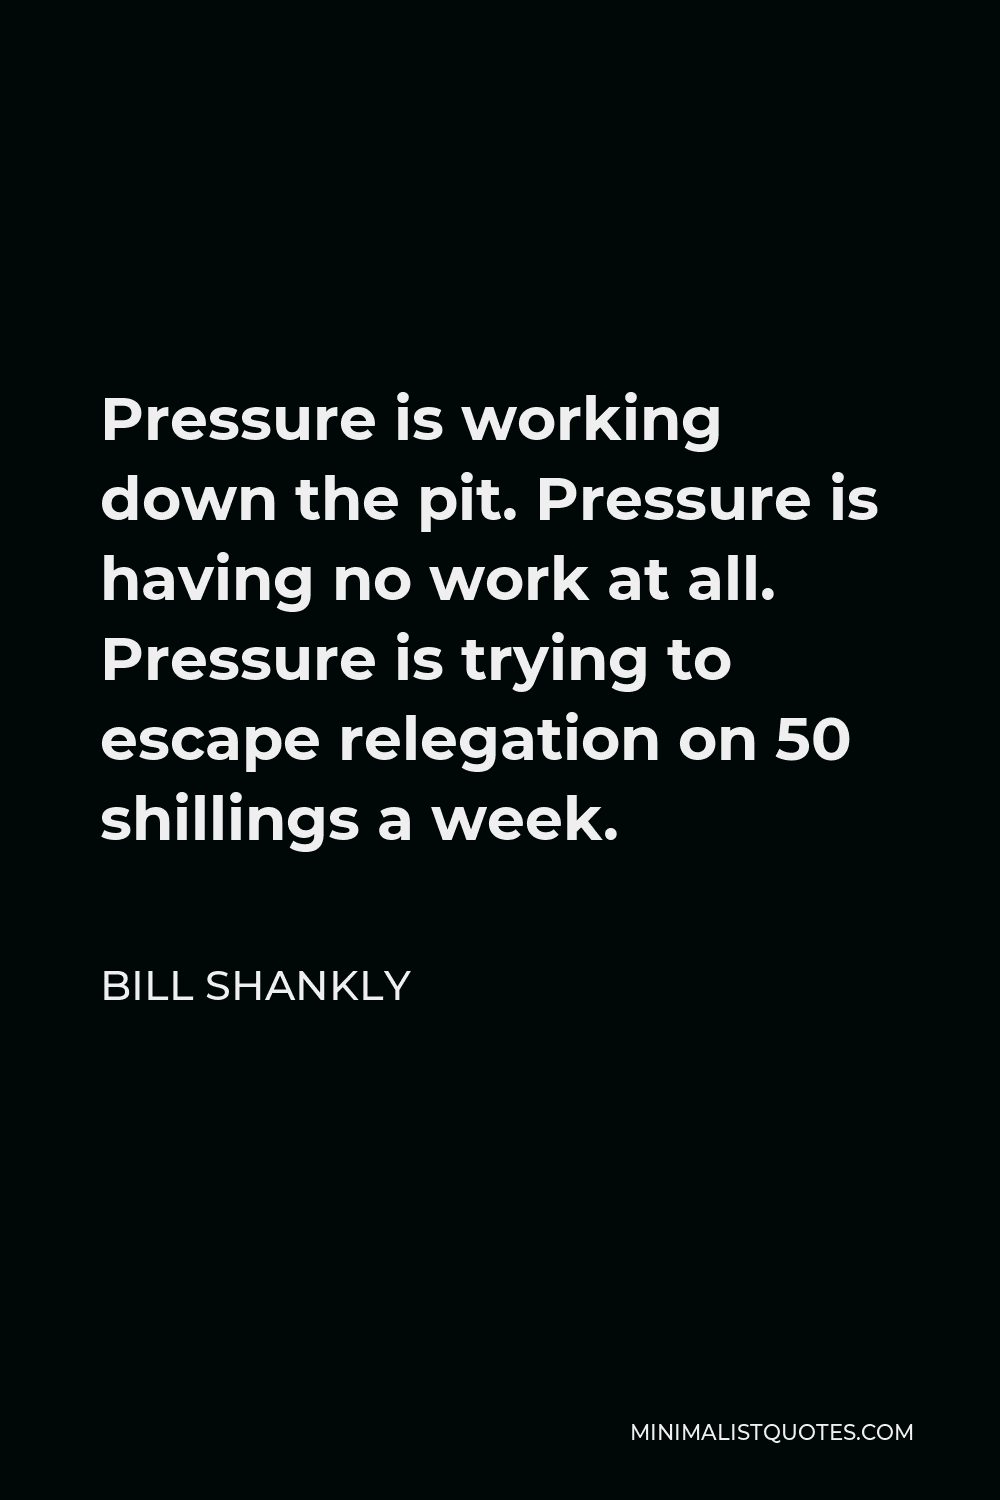 Bill Shankly Quote - Pressure is working down the pit. Pressure is having no work at all. Pressure is trying to escape relegation on 50 shillings a week.